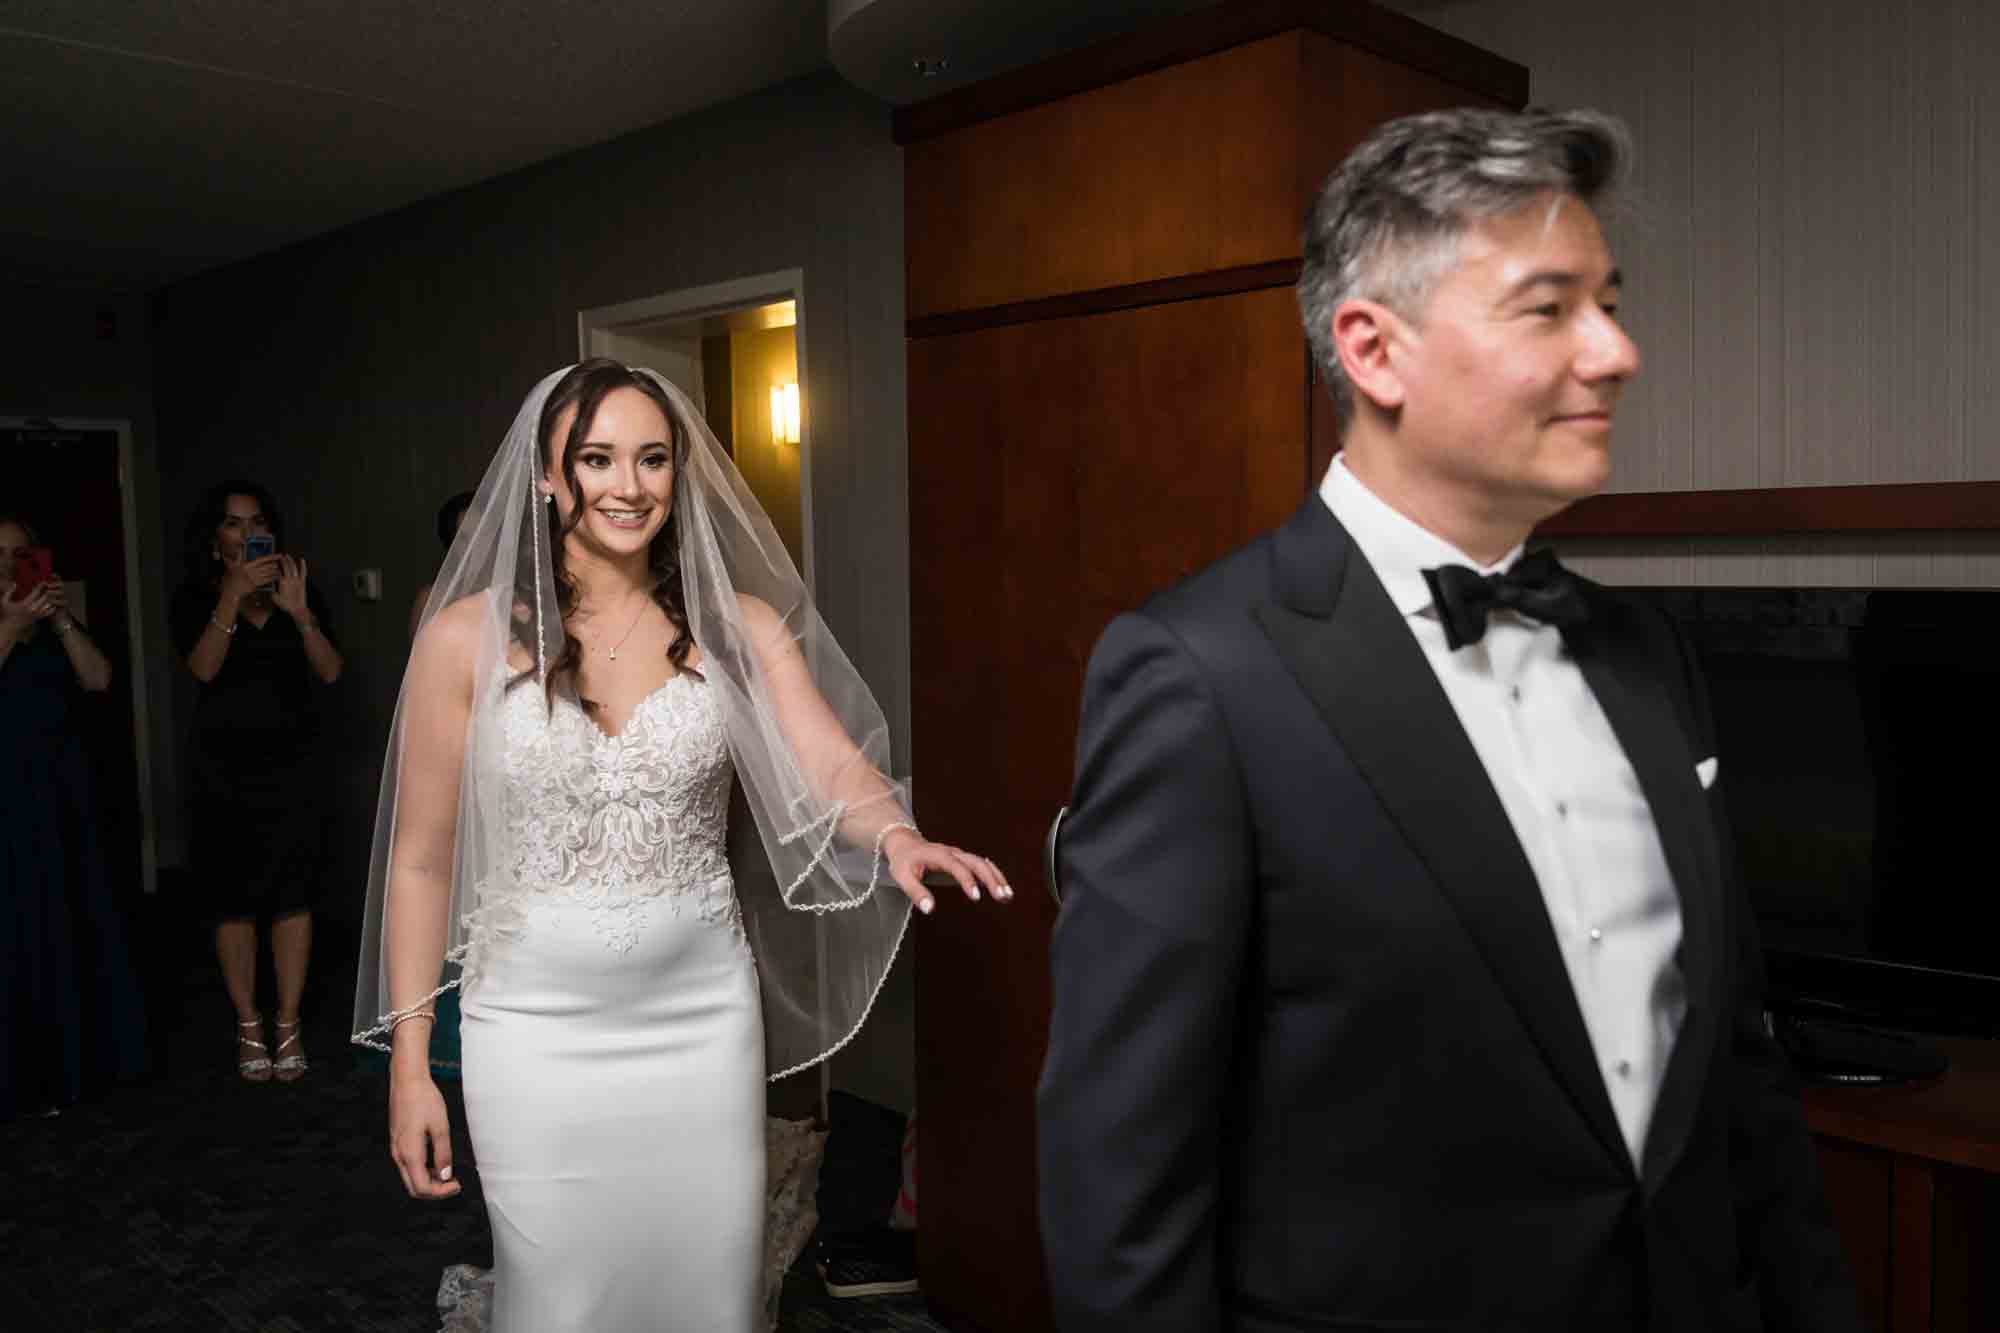 Bride walking up behind father with hand extended